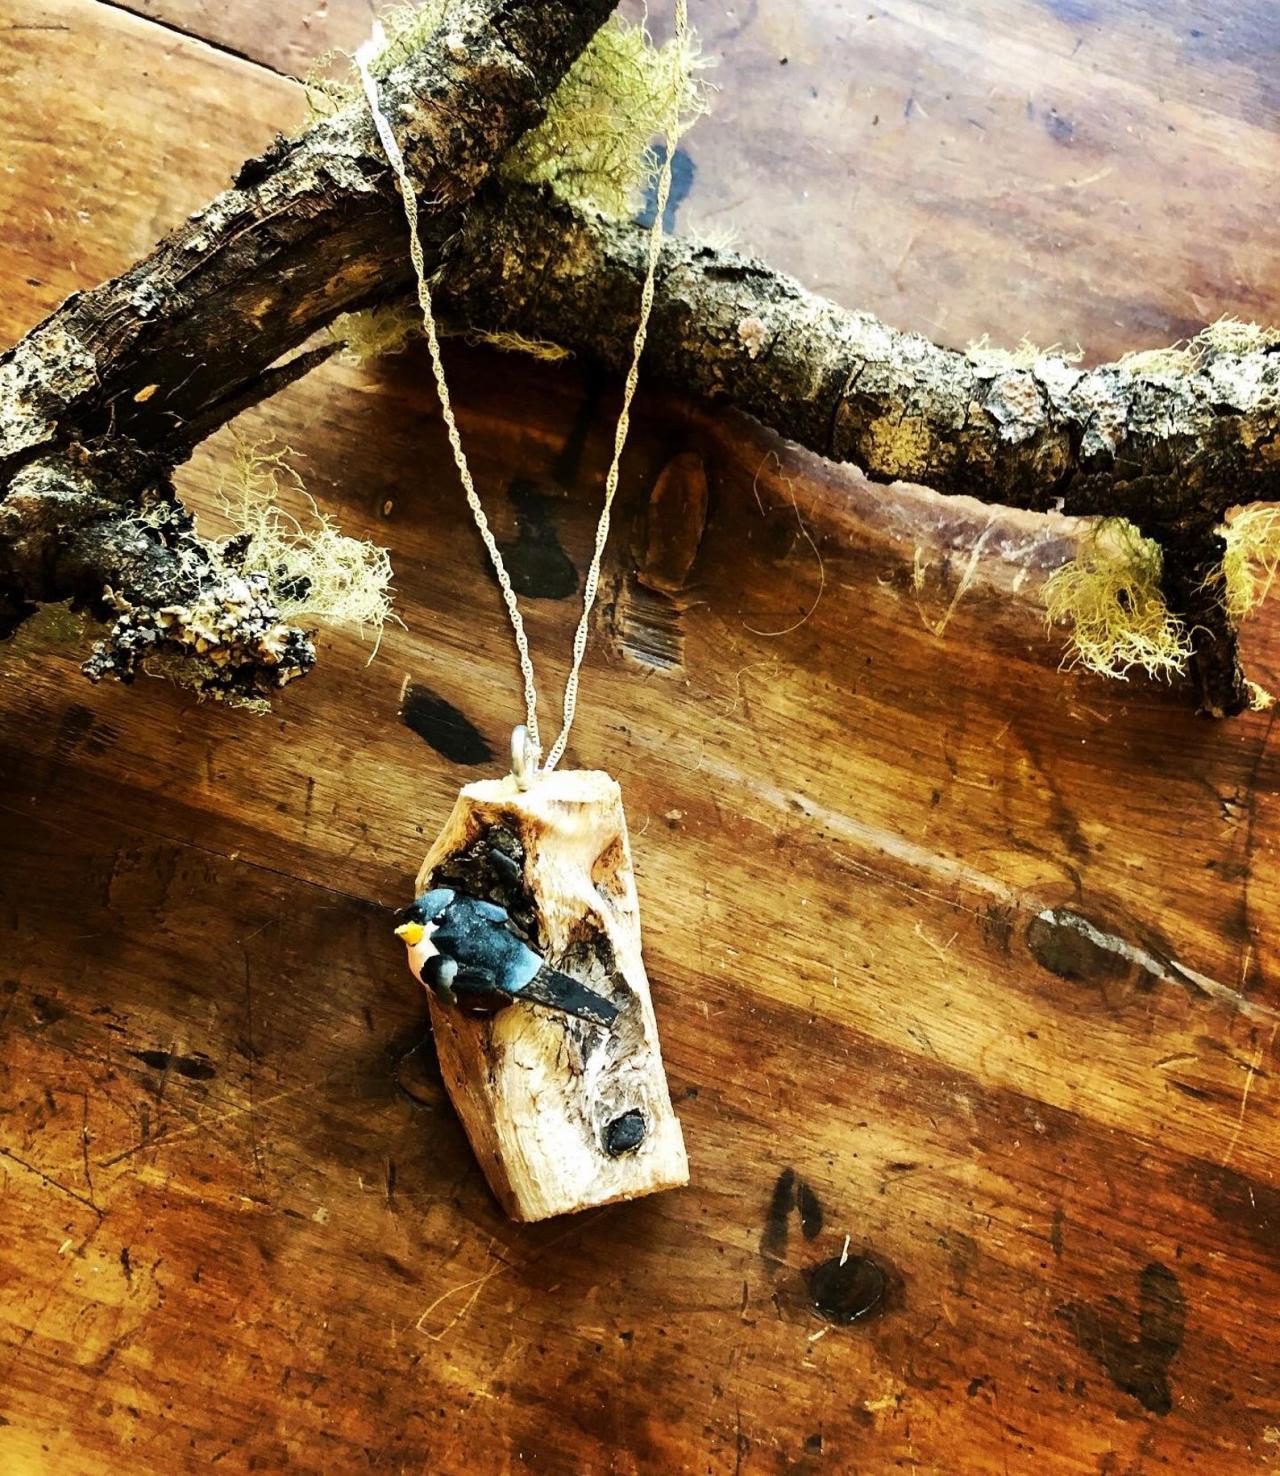 Bird in Tree Driftwood Necklace Bird Necklace • Bird Jewelry • Nature Necklace • Christmas Gifts • Sister Gift • Gift for Women